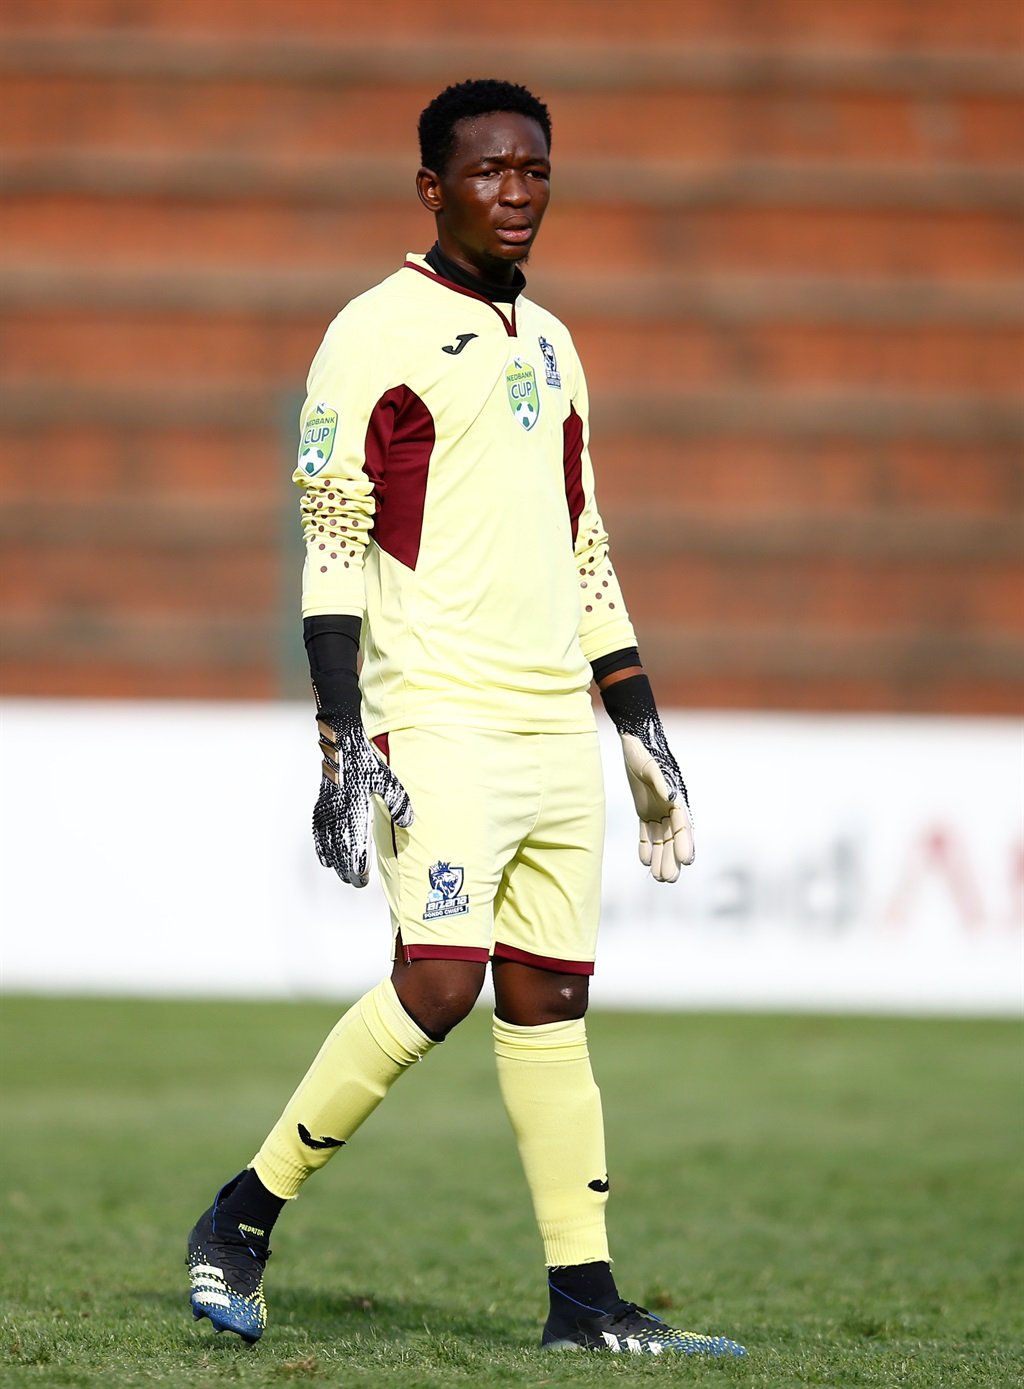 DURBAN, SOUTH AFRICA - FEBRUARY 04: Kopano Thuntsane Goal keeper of Bizana Pondo Chiefs  during the Nedbank Cup, Last 32 match between Bizana Pondo Chiefs and Cape Town All Stars at King Zwelithini Stadium on February 04, 2021 in Durban, South Africa. (Photo by Steve Haag/BackpagePix/Gallo Images)